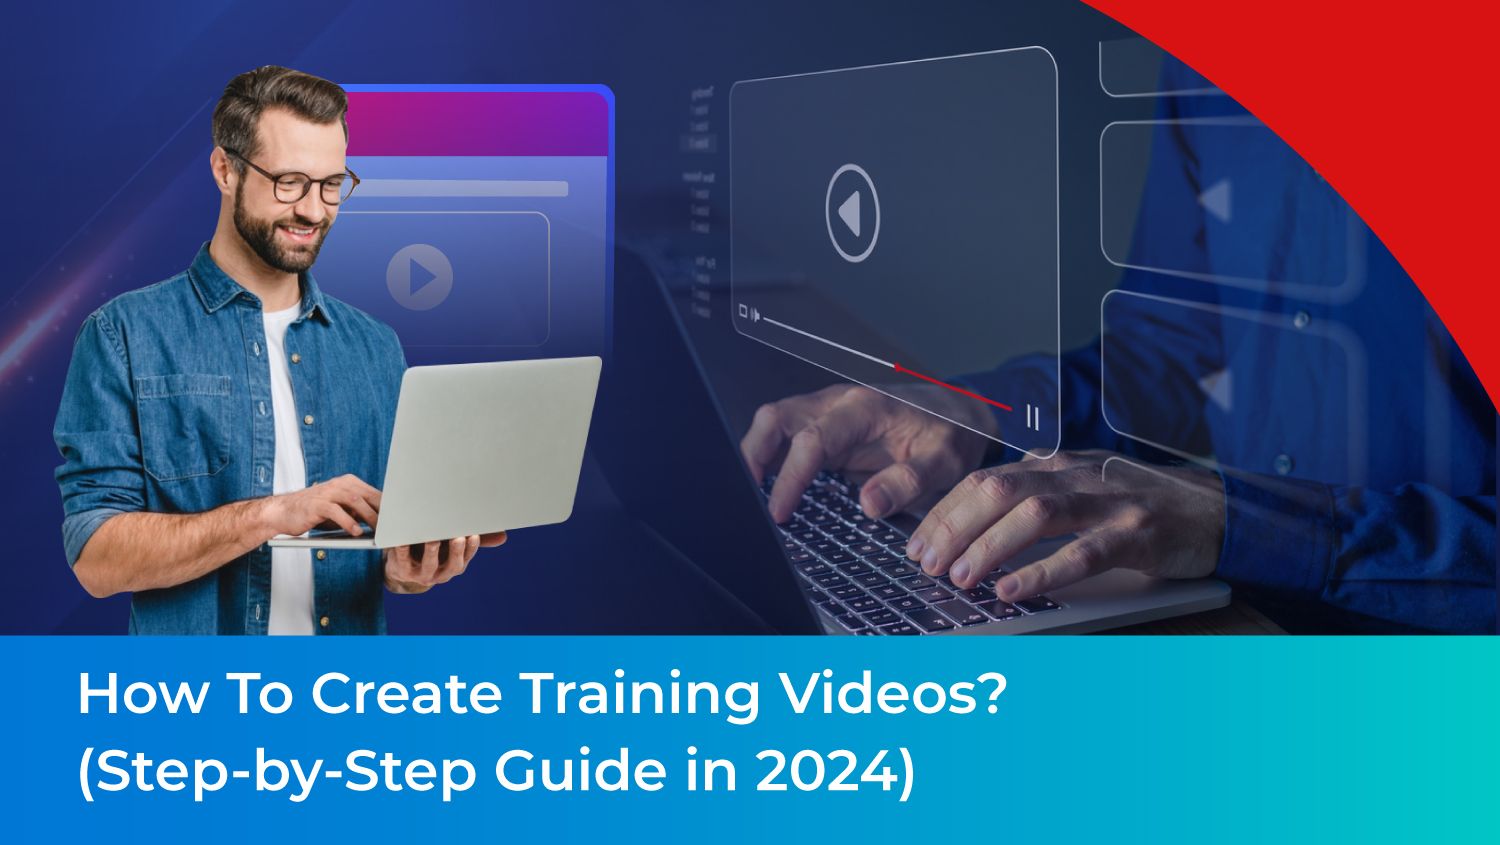 How To Create Training Videos? (Step-by-Step Guide in 2024)